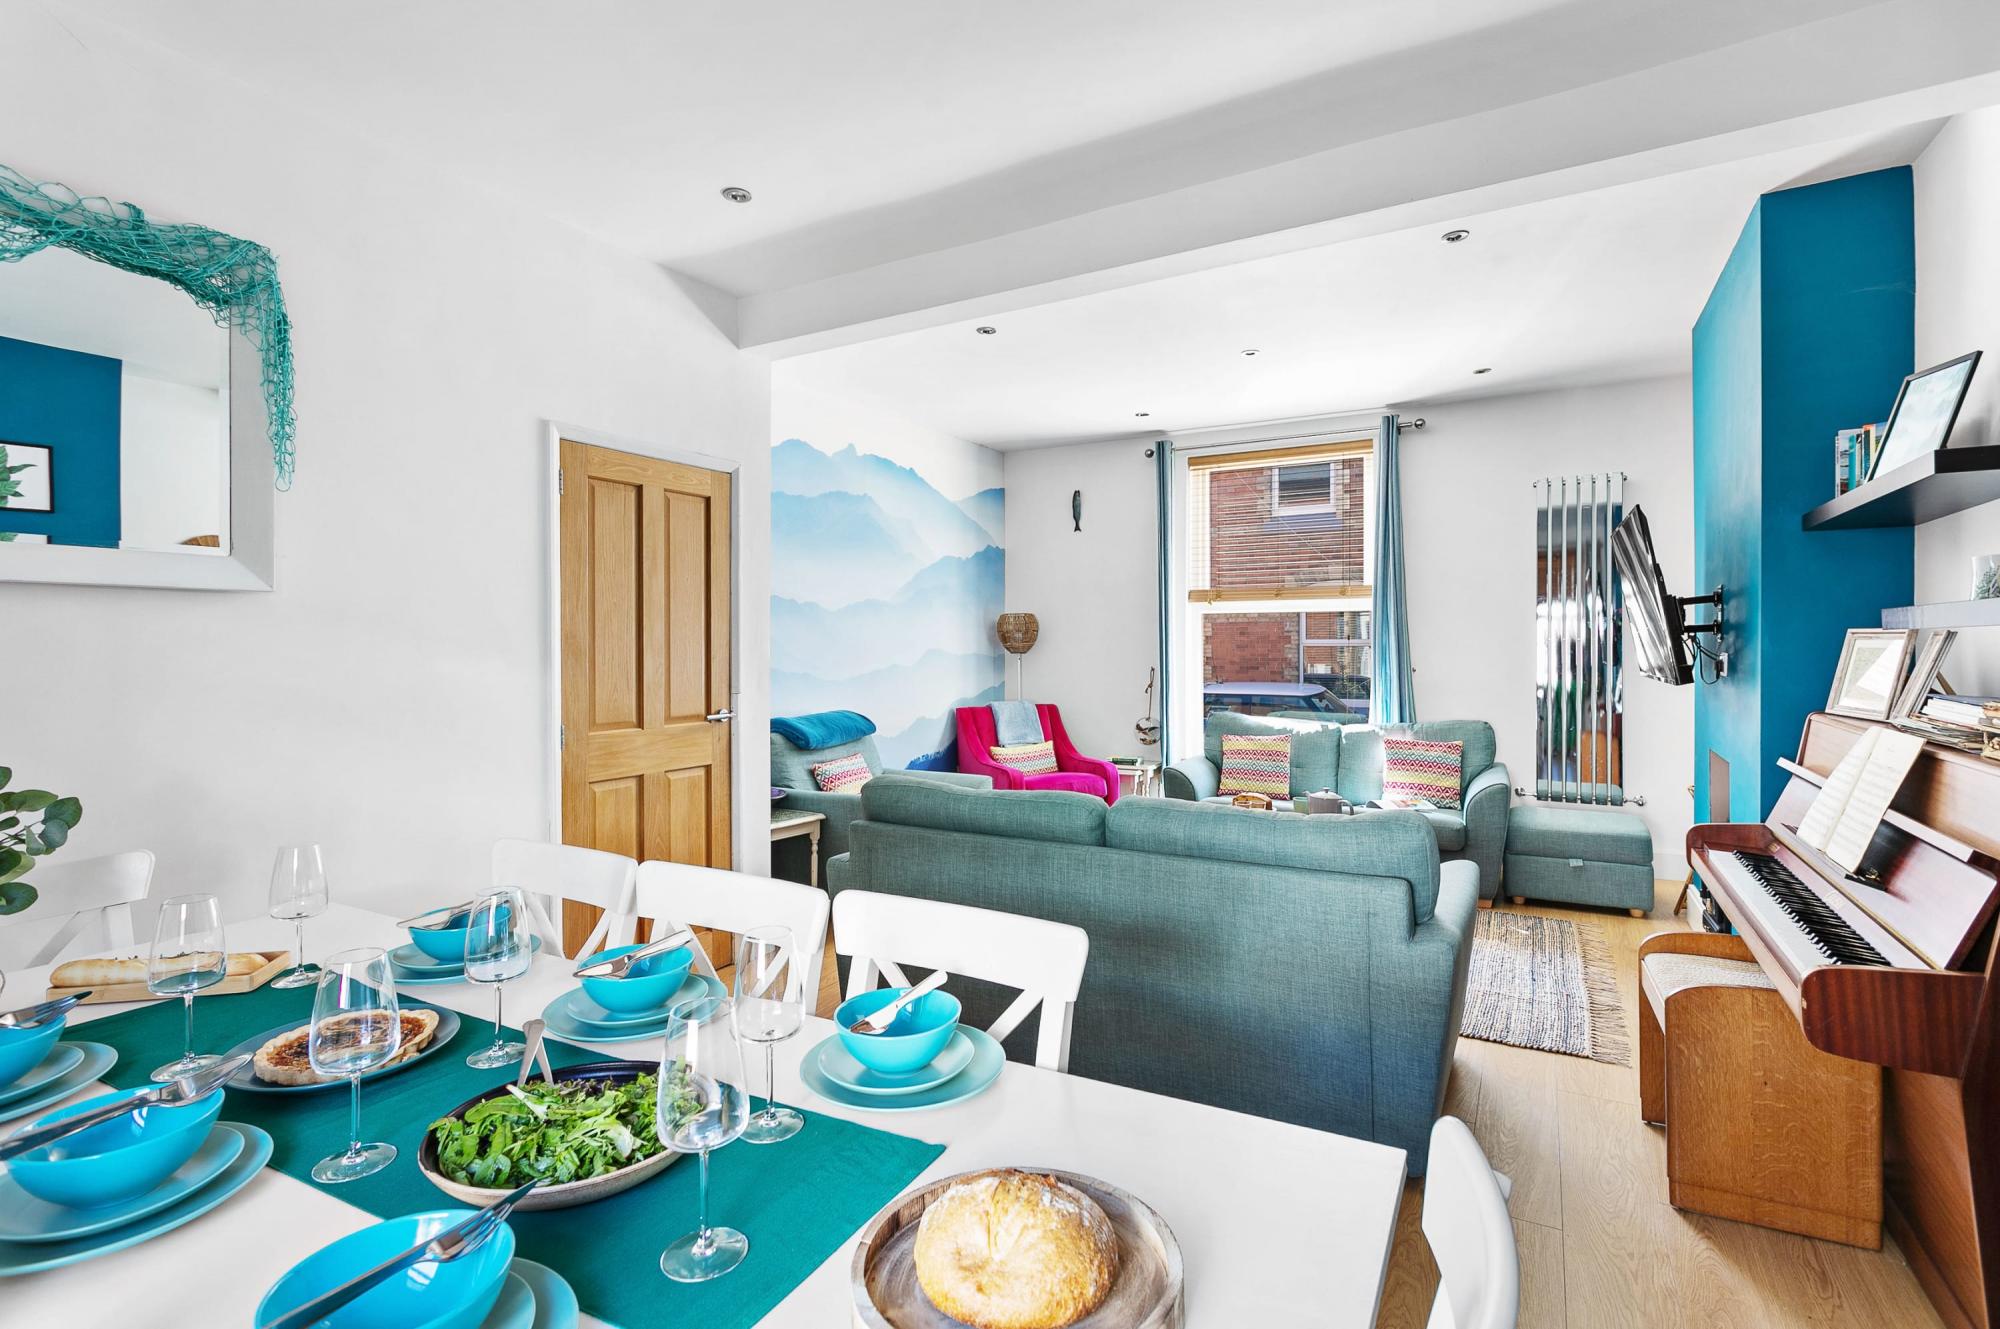 Property Image 1 - The Terrace - Light  bright  characterful near beaches